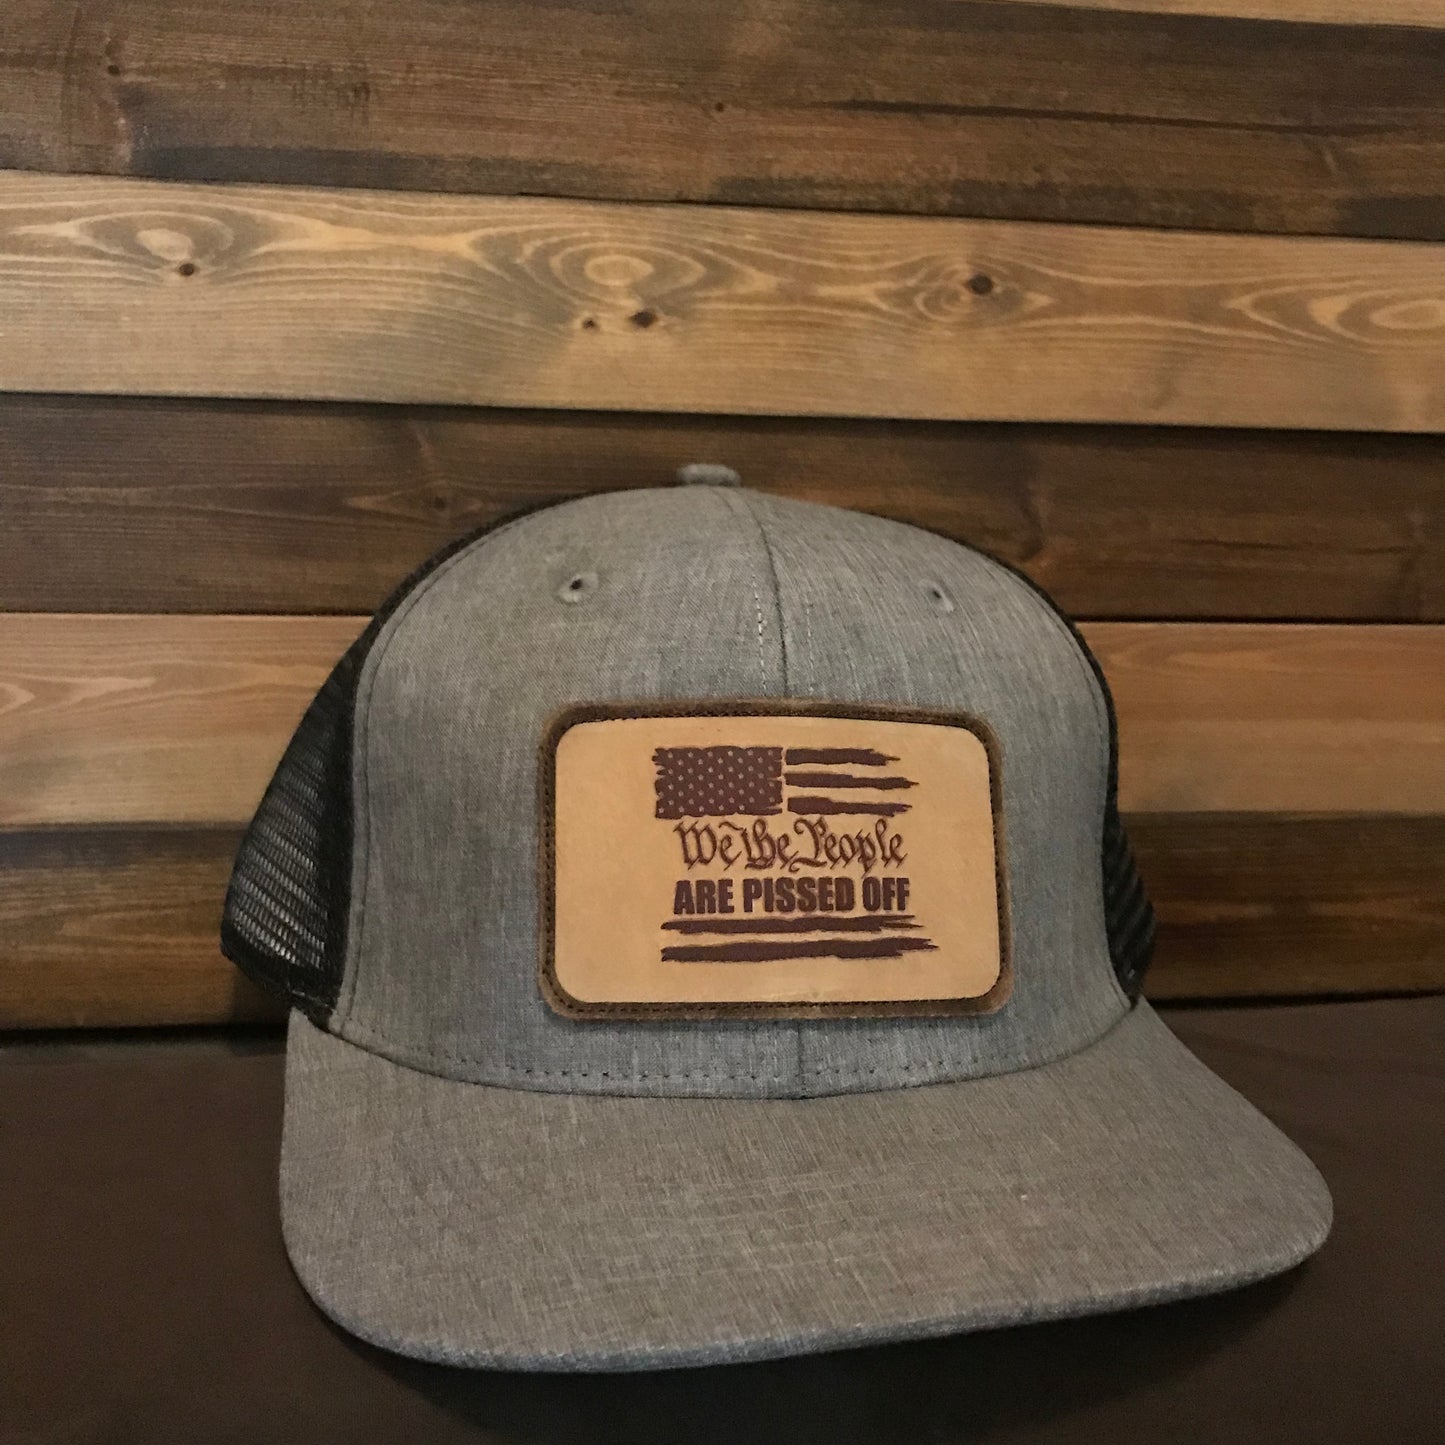 WE THE PEOPLE "ARE PISSED OFF" TRUCKER HAT